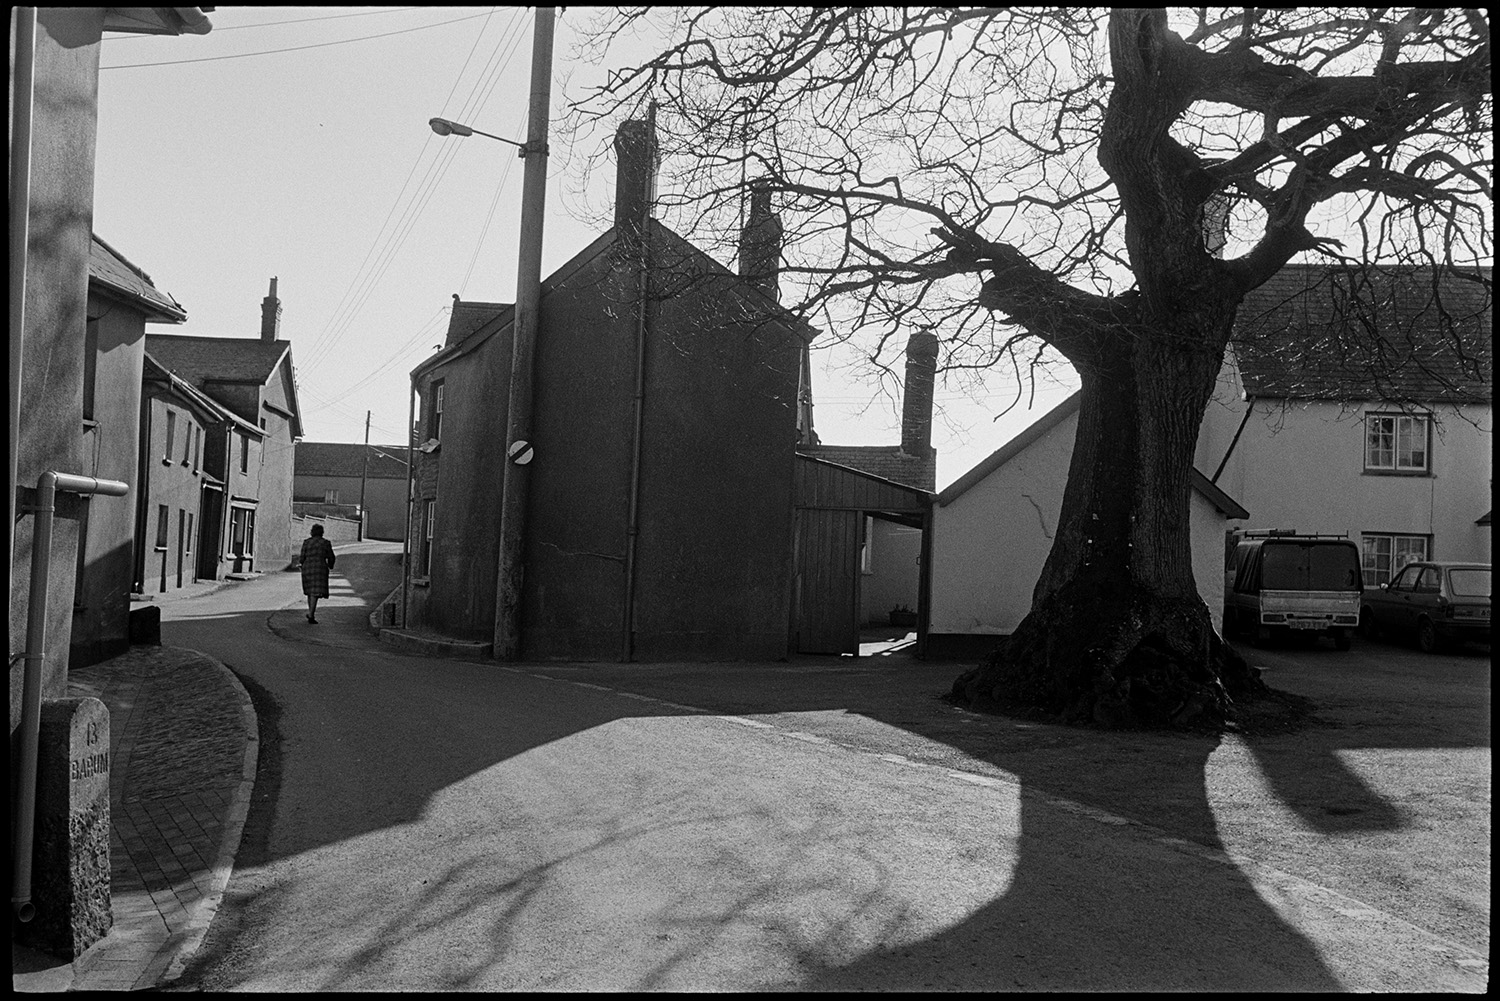 Village square with oak tree mother and children in cold sunlight.
[The village square in Burrington, showing buildings, the Burrington oak tree and a woman walking along the road. The shadow of the oak tree is falling across the road.]